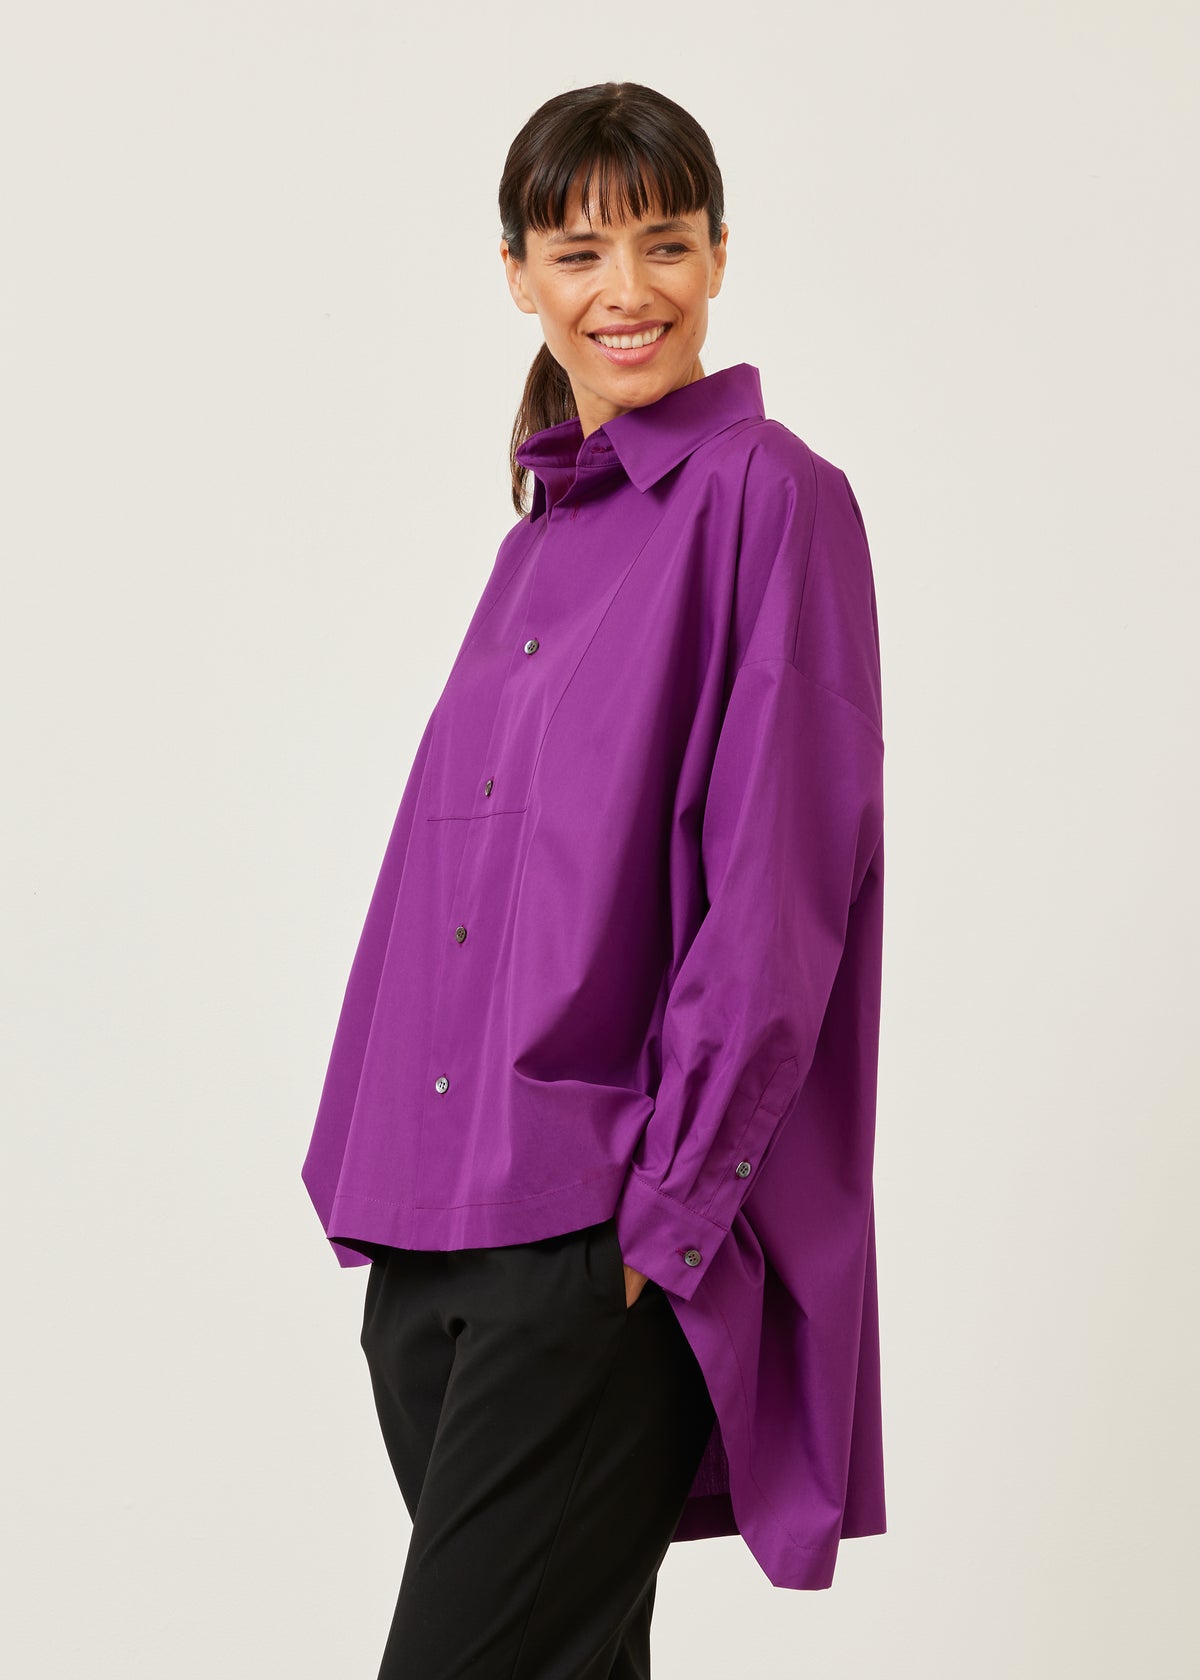 smaller front larger back shirt with collar and bib front - mid plus